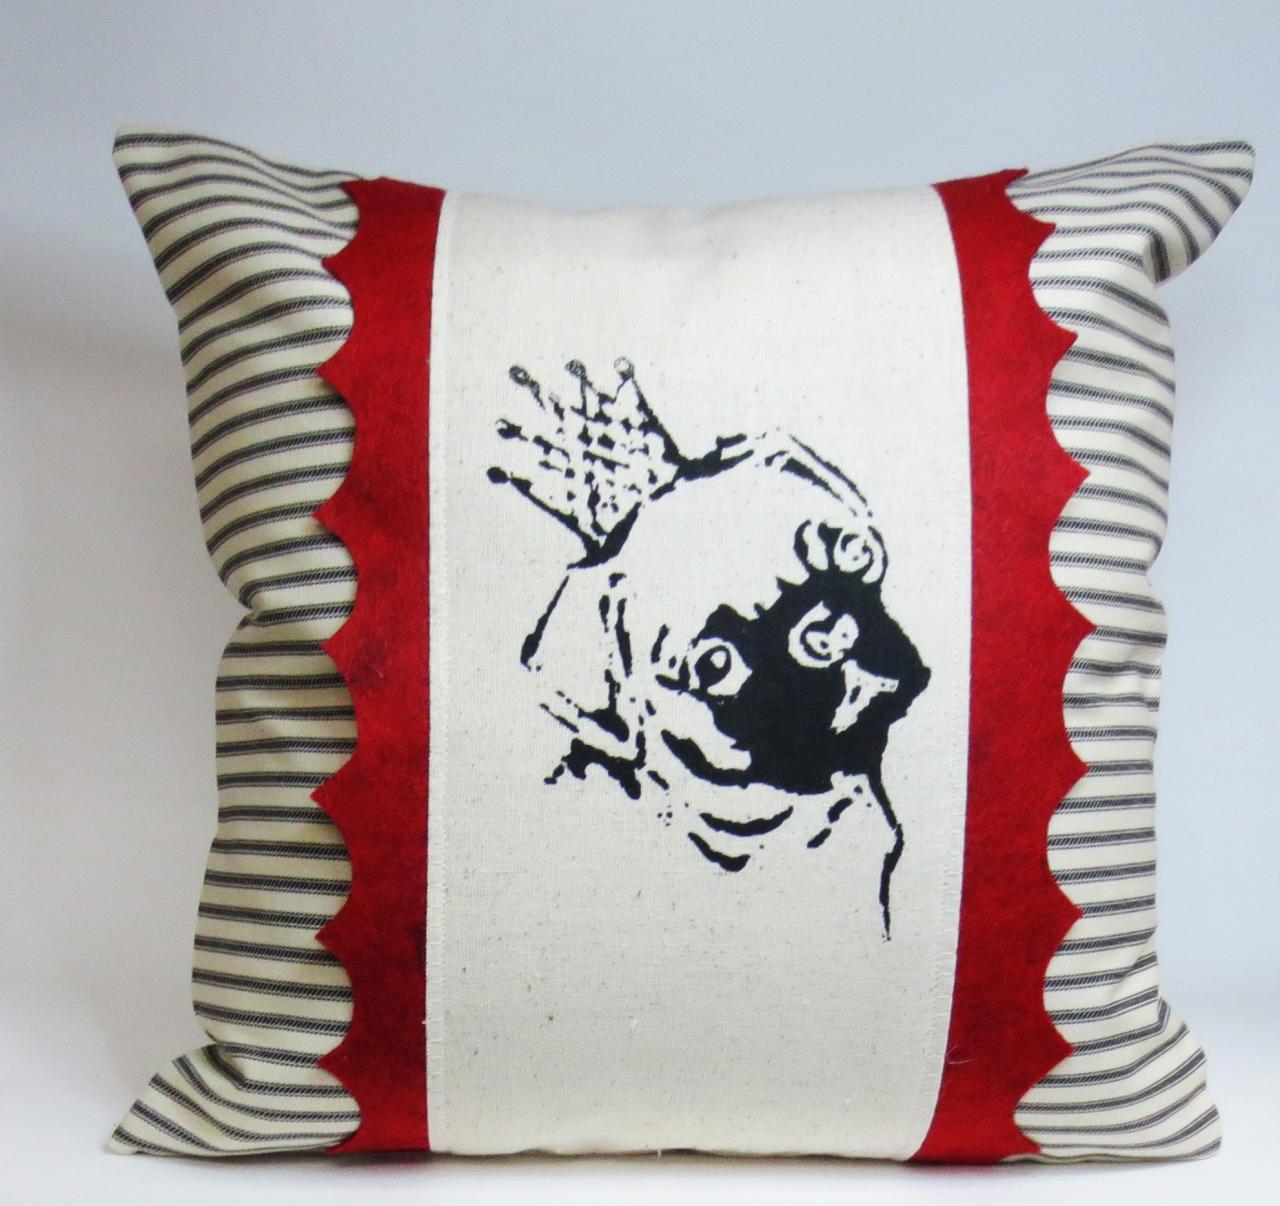 Decorative Throw Pillow Cushion Cover With Pug Screen Print And Red Hand Cut Felt Scallop Trim